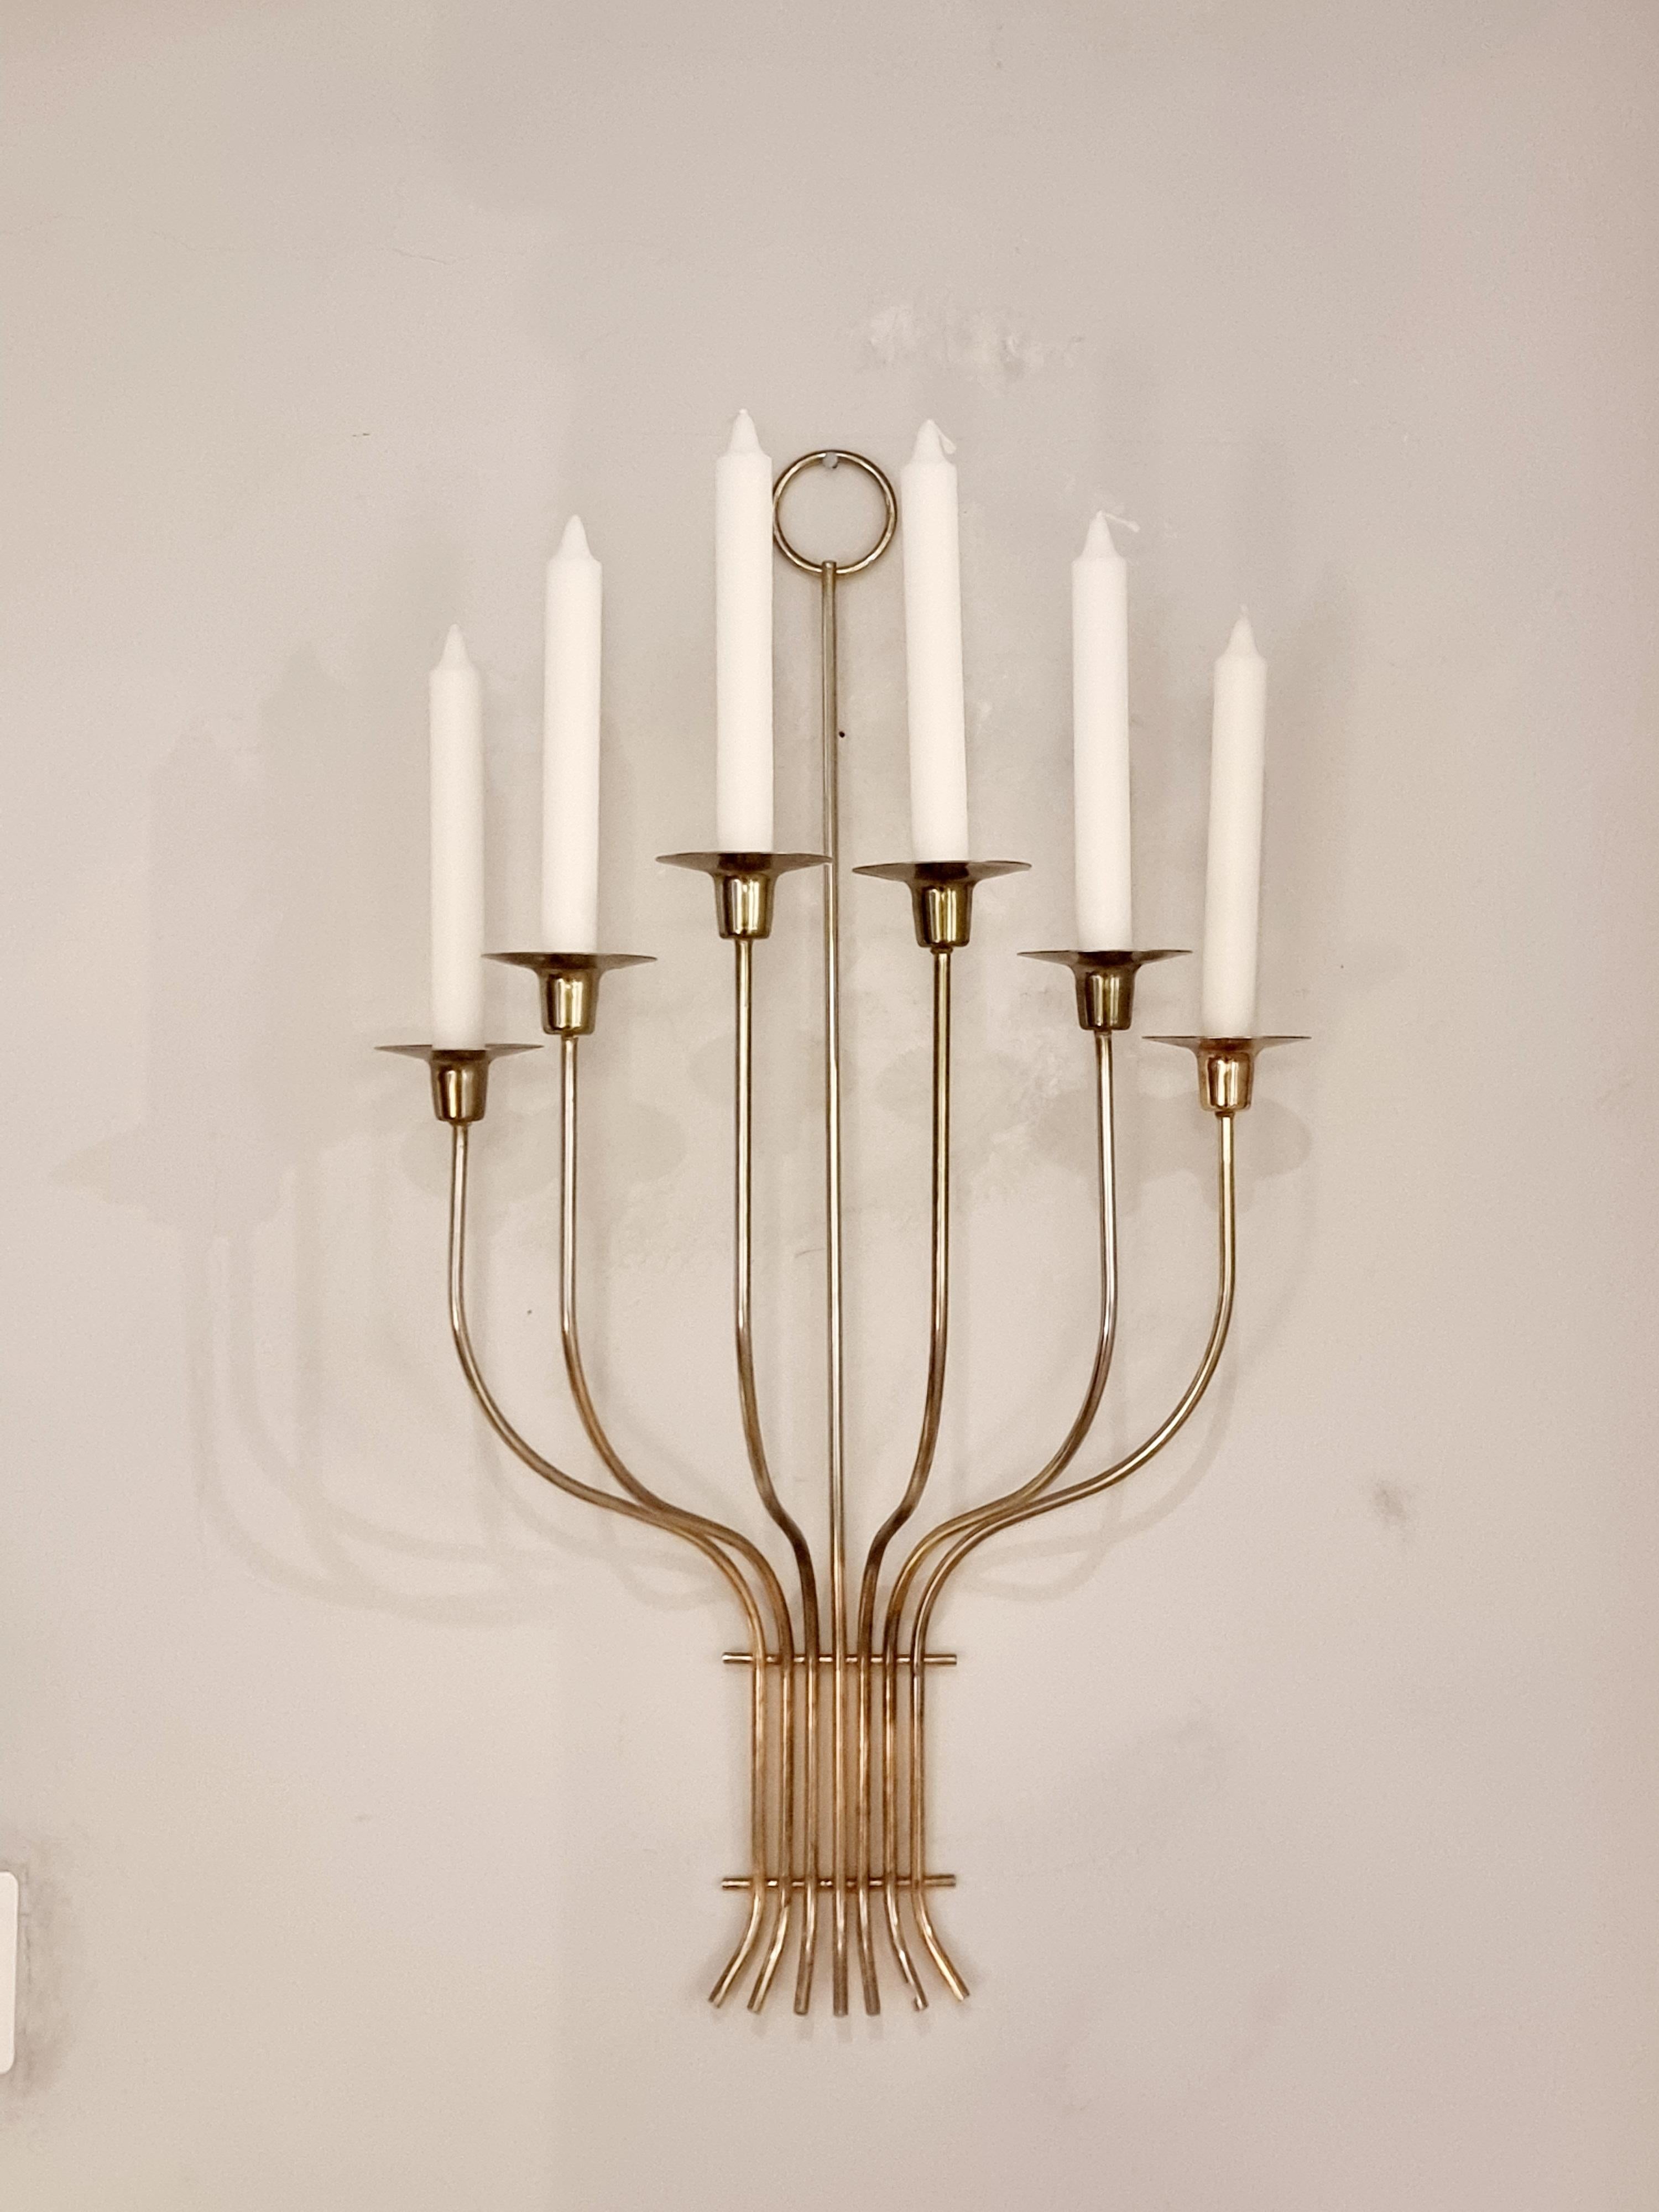 Large beautiful and decorative wall candle holder / sconce, for six candles. In brass, in the manner of german/american designer Tommi Parzinger (1903-1981). Hollywood regency, 1960/70s.

In good condition, smaller signs of age and wear. 